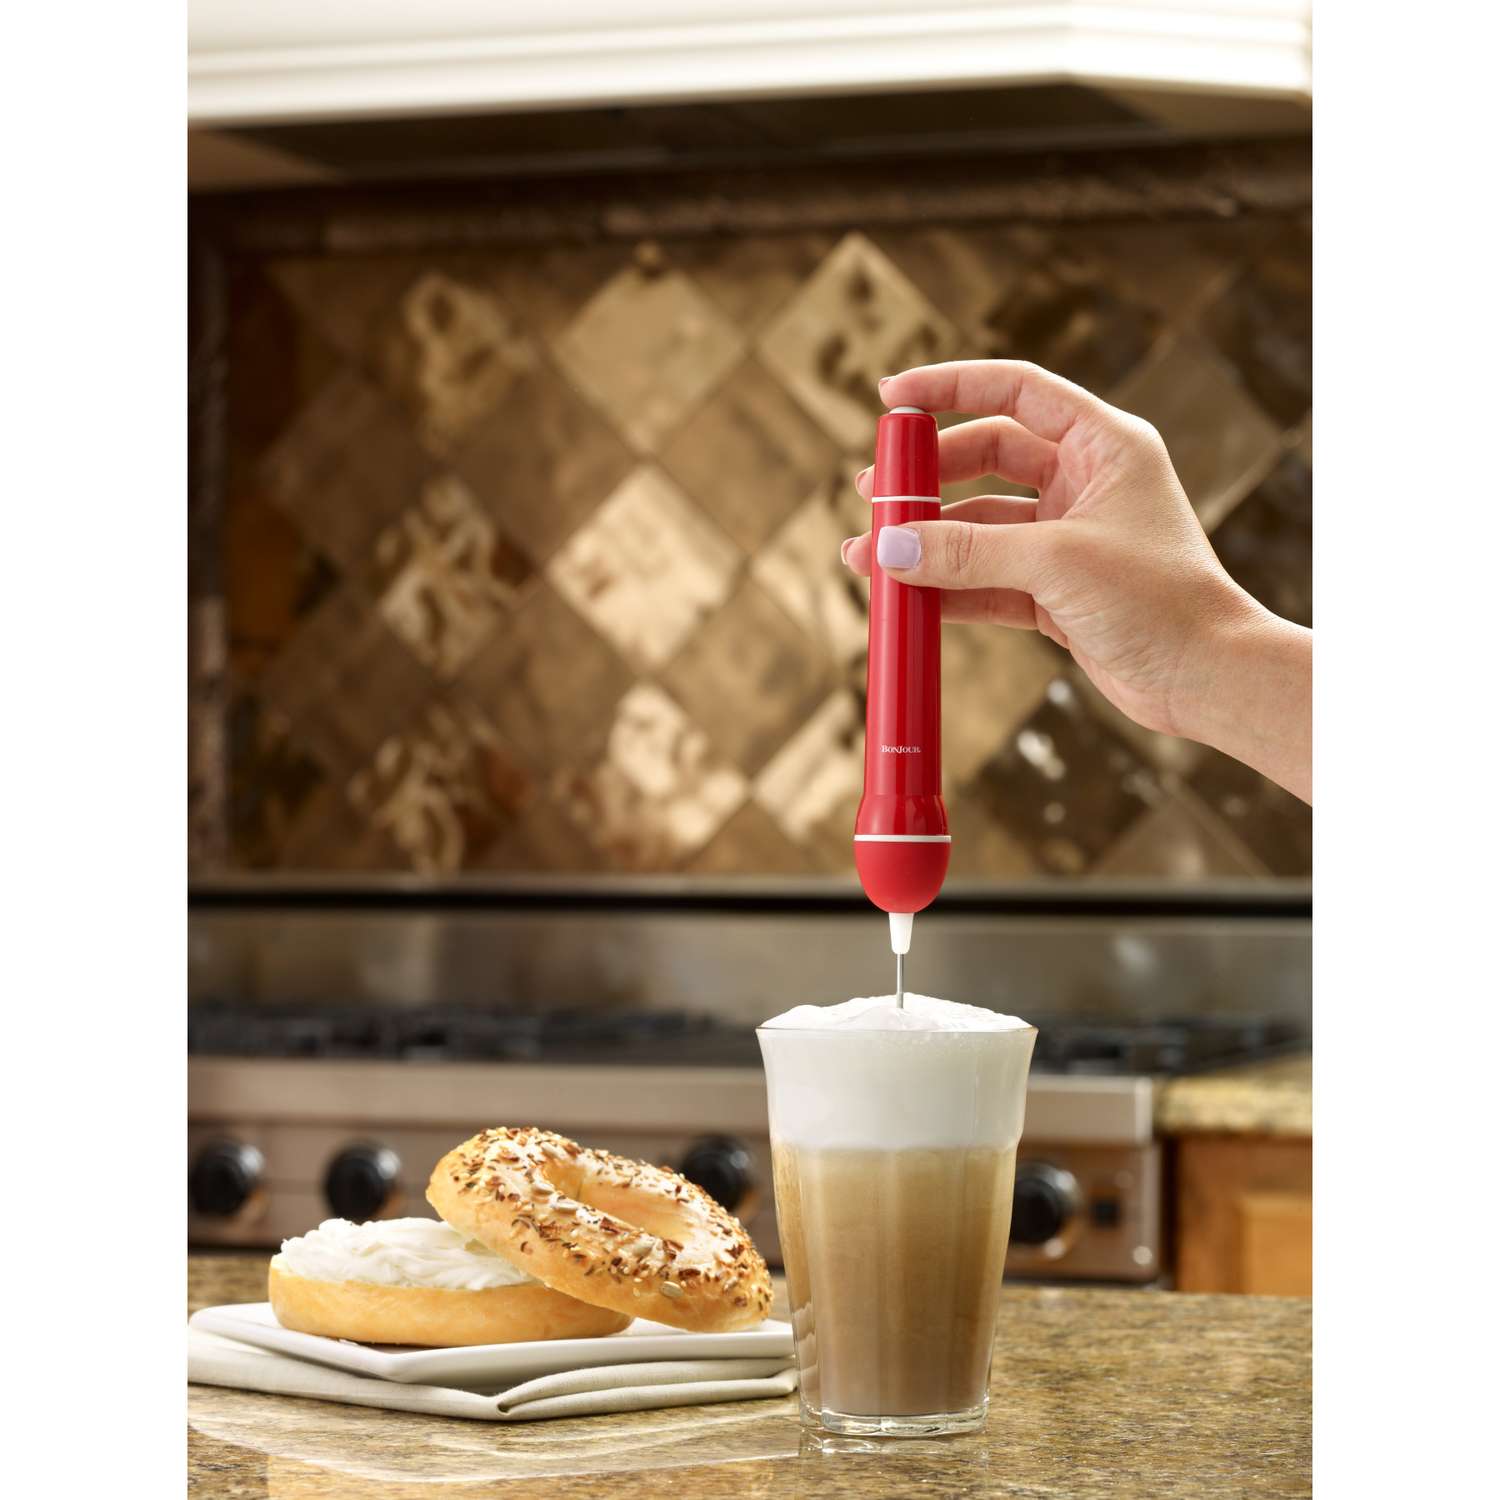 BonJour Coffee Hand-Held Battery-Operated Beverage Whisk / Milk